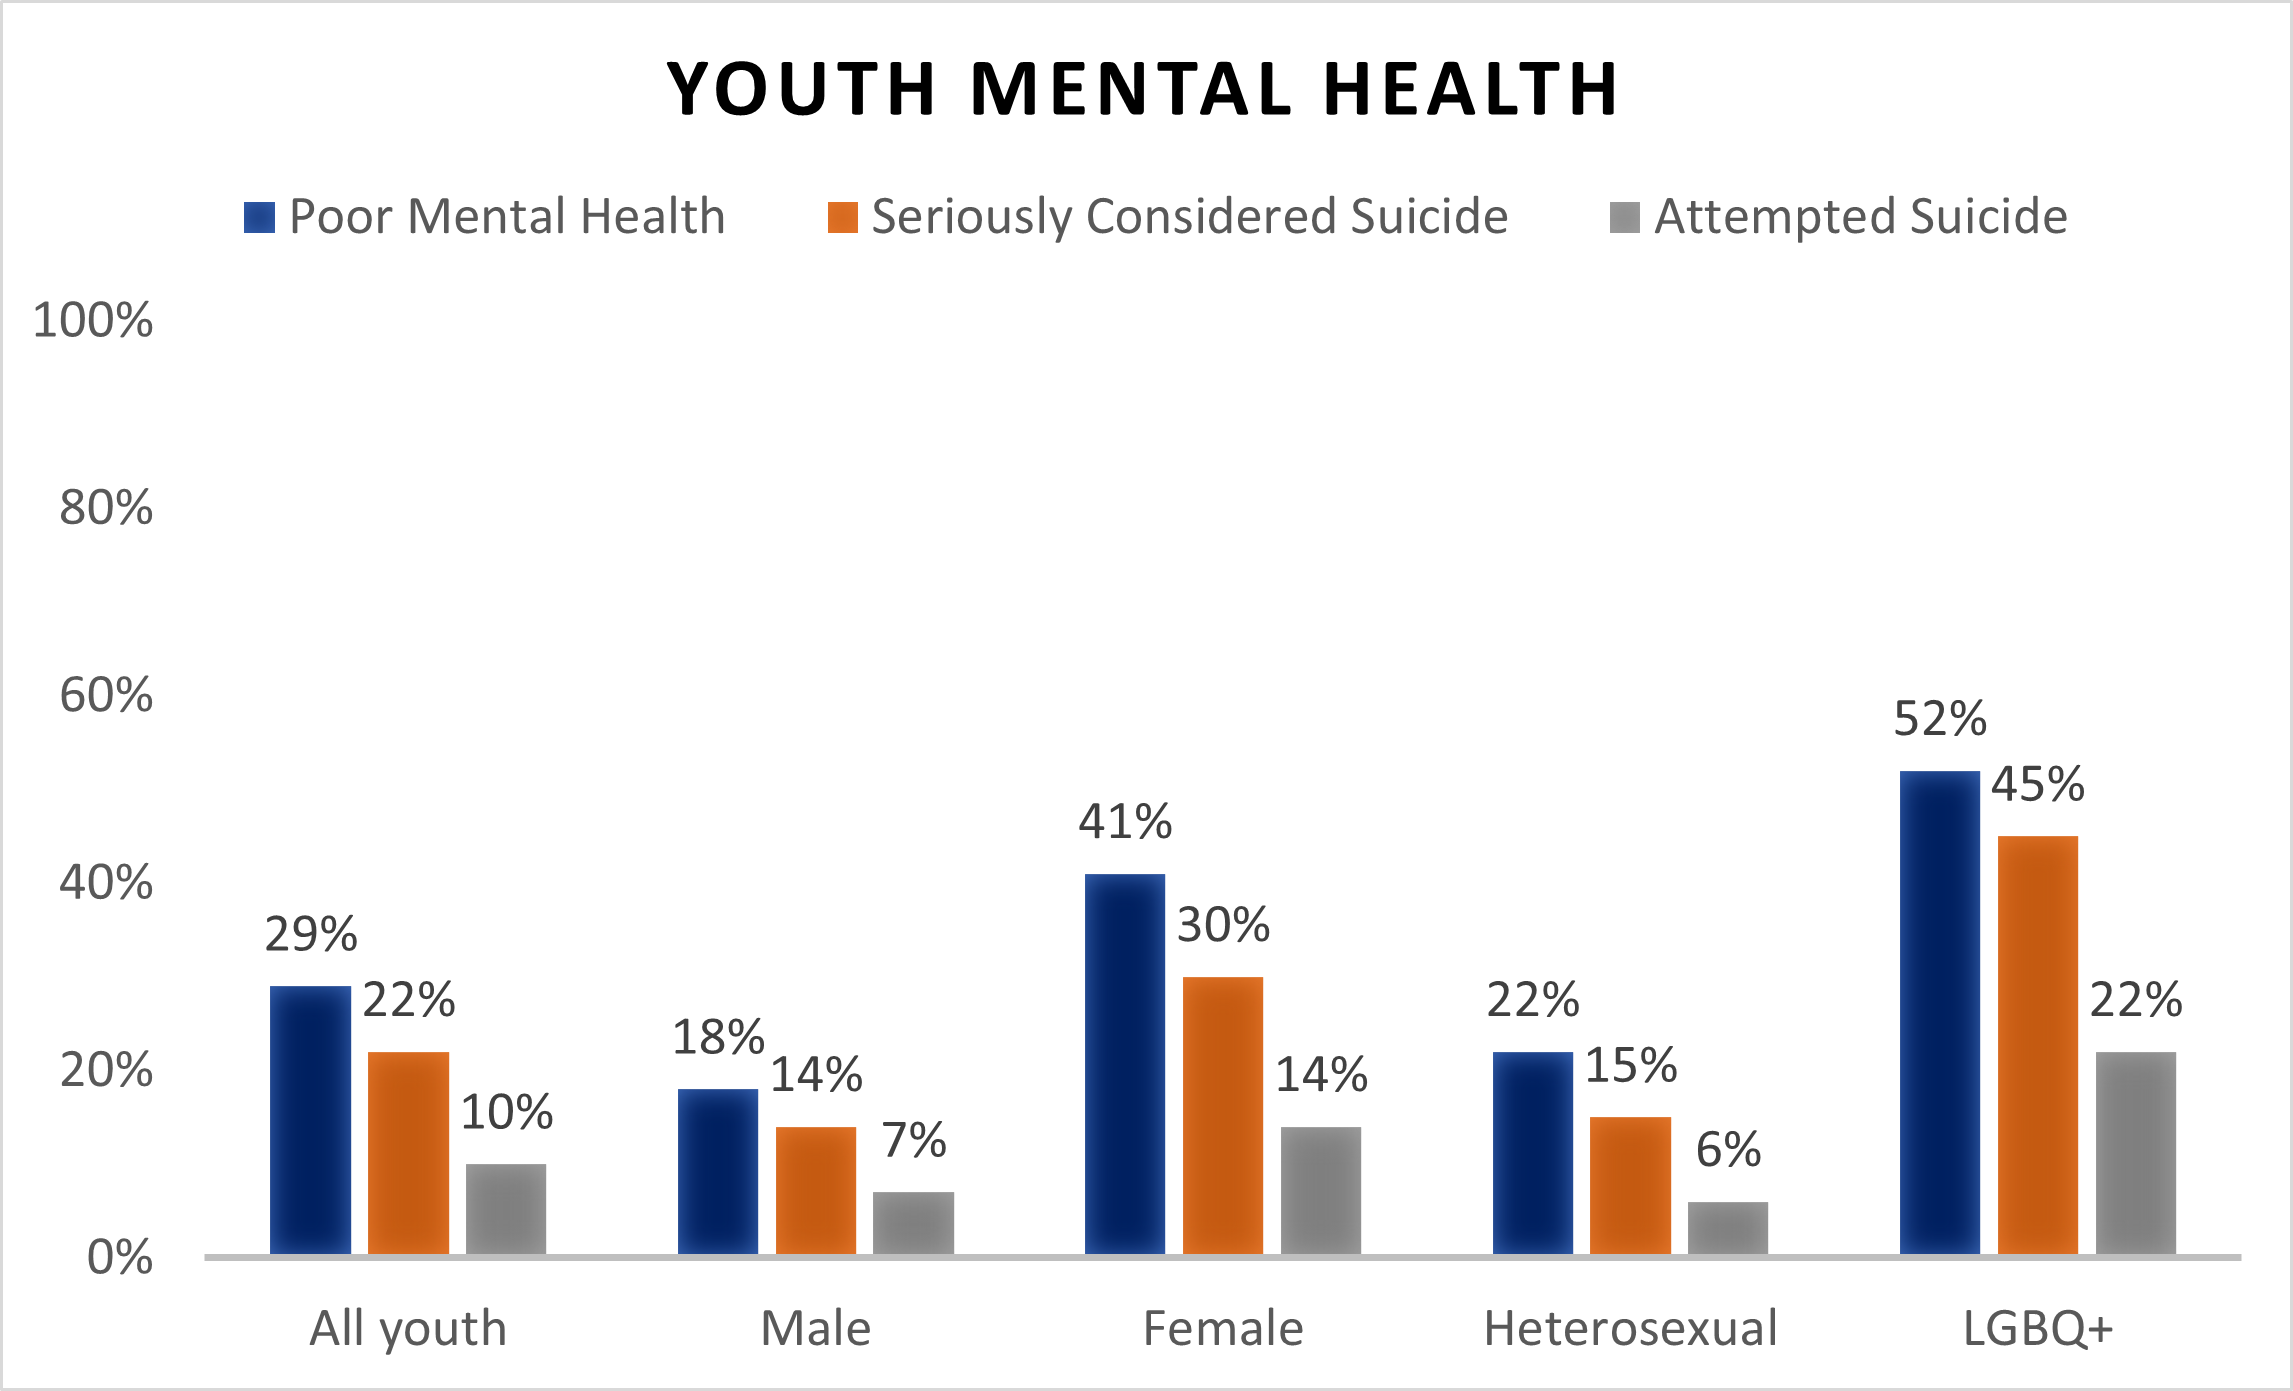 Bar chart showing results from CDC Youth Risk Behavior Survey. Results show percentages of respondents who identify as having poor mental health, seriously considered suicide, and attempted suicide. The groups represented are: all youth, male, female, heterosexual, and LGBQ+. The LGBQ+ respondents have the highest numbers across the board, followed by female respondents, followed by all youth, heterosexual, and then male respondents.